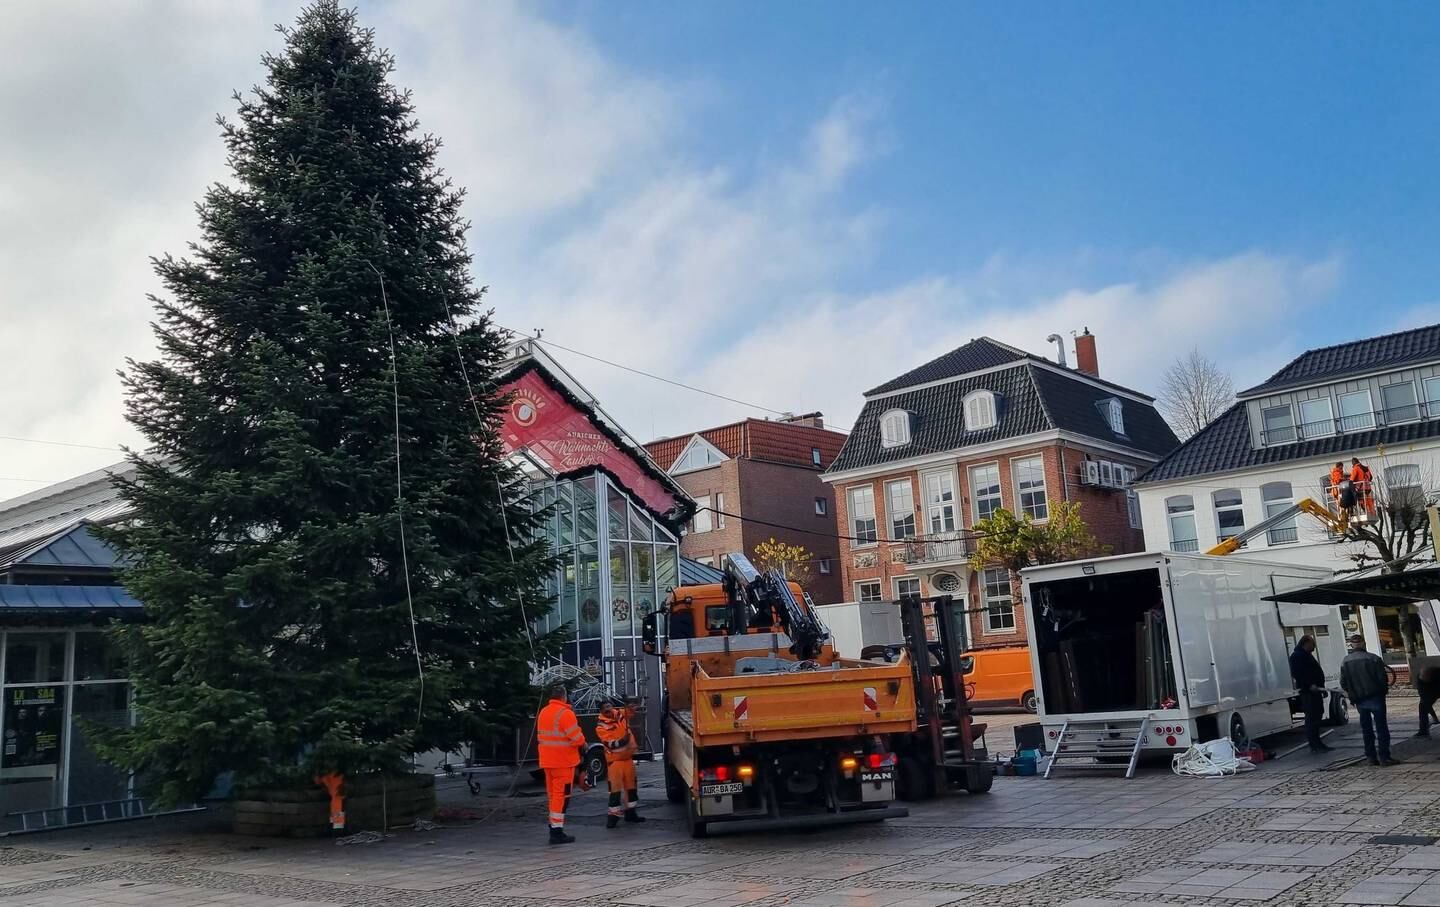 Workers prepare a Christmas market in the town square in Aurich, Germany. Tim Stickings/The National